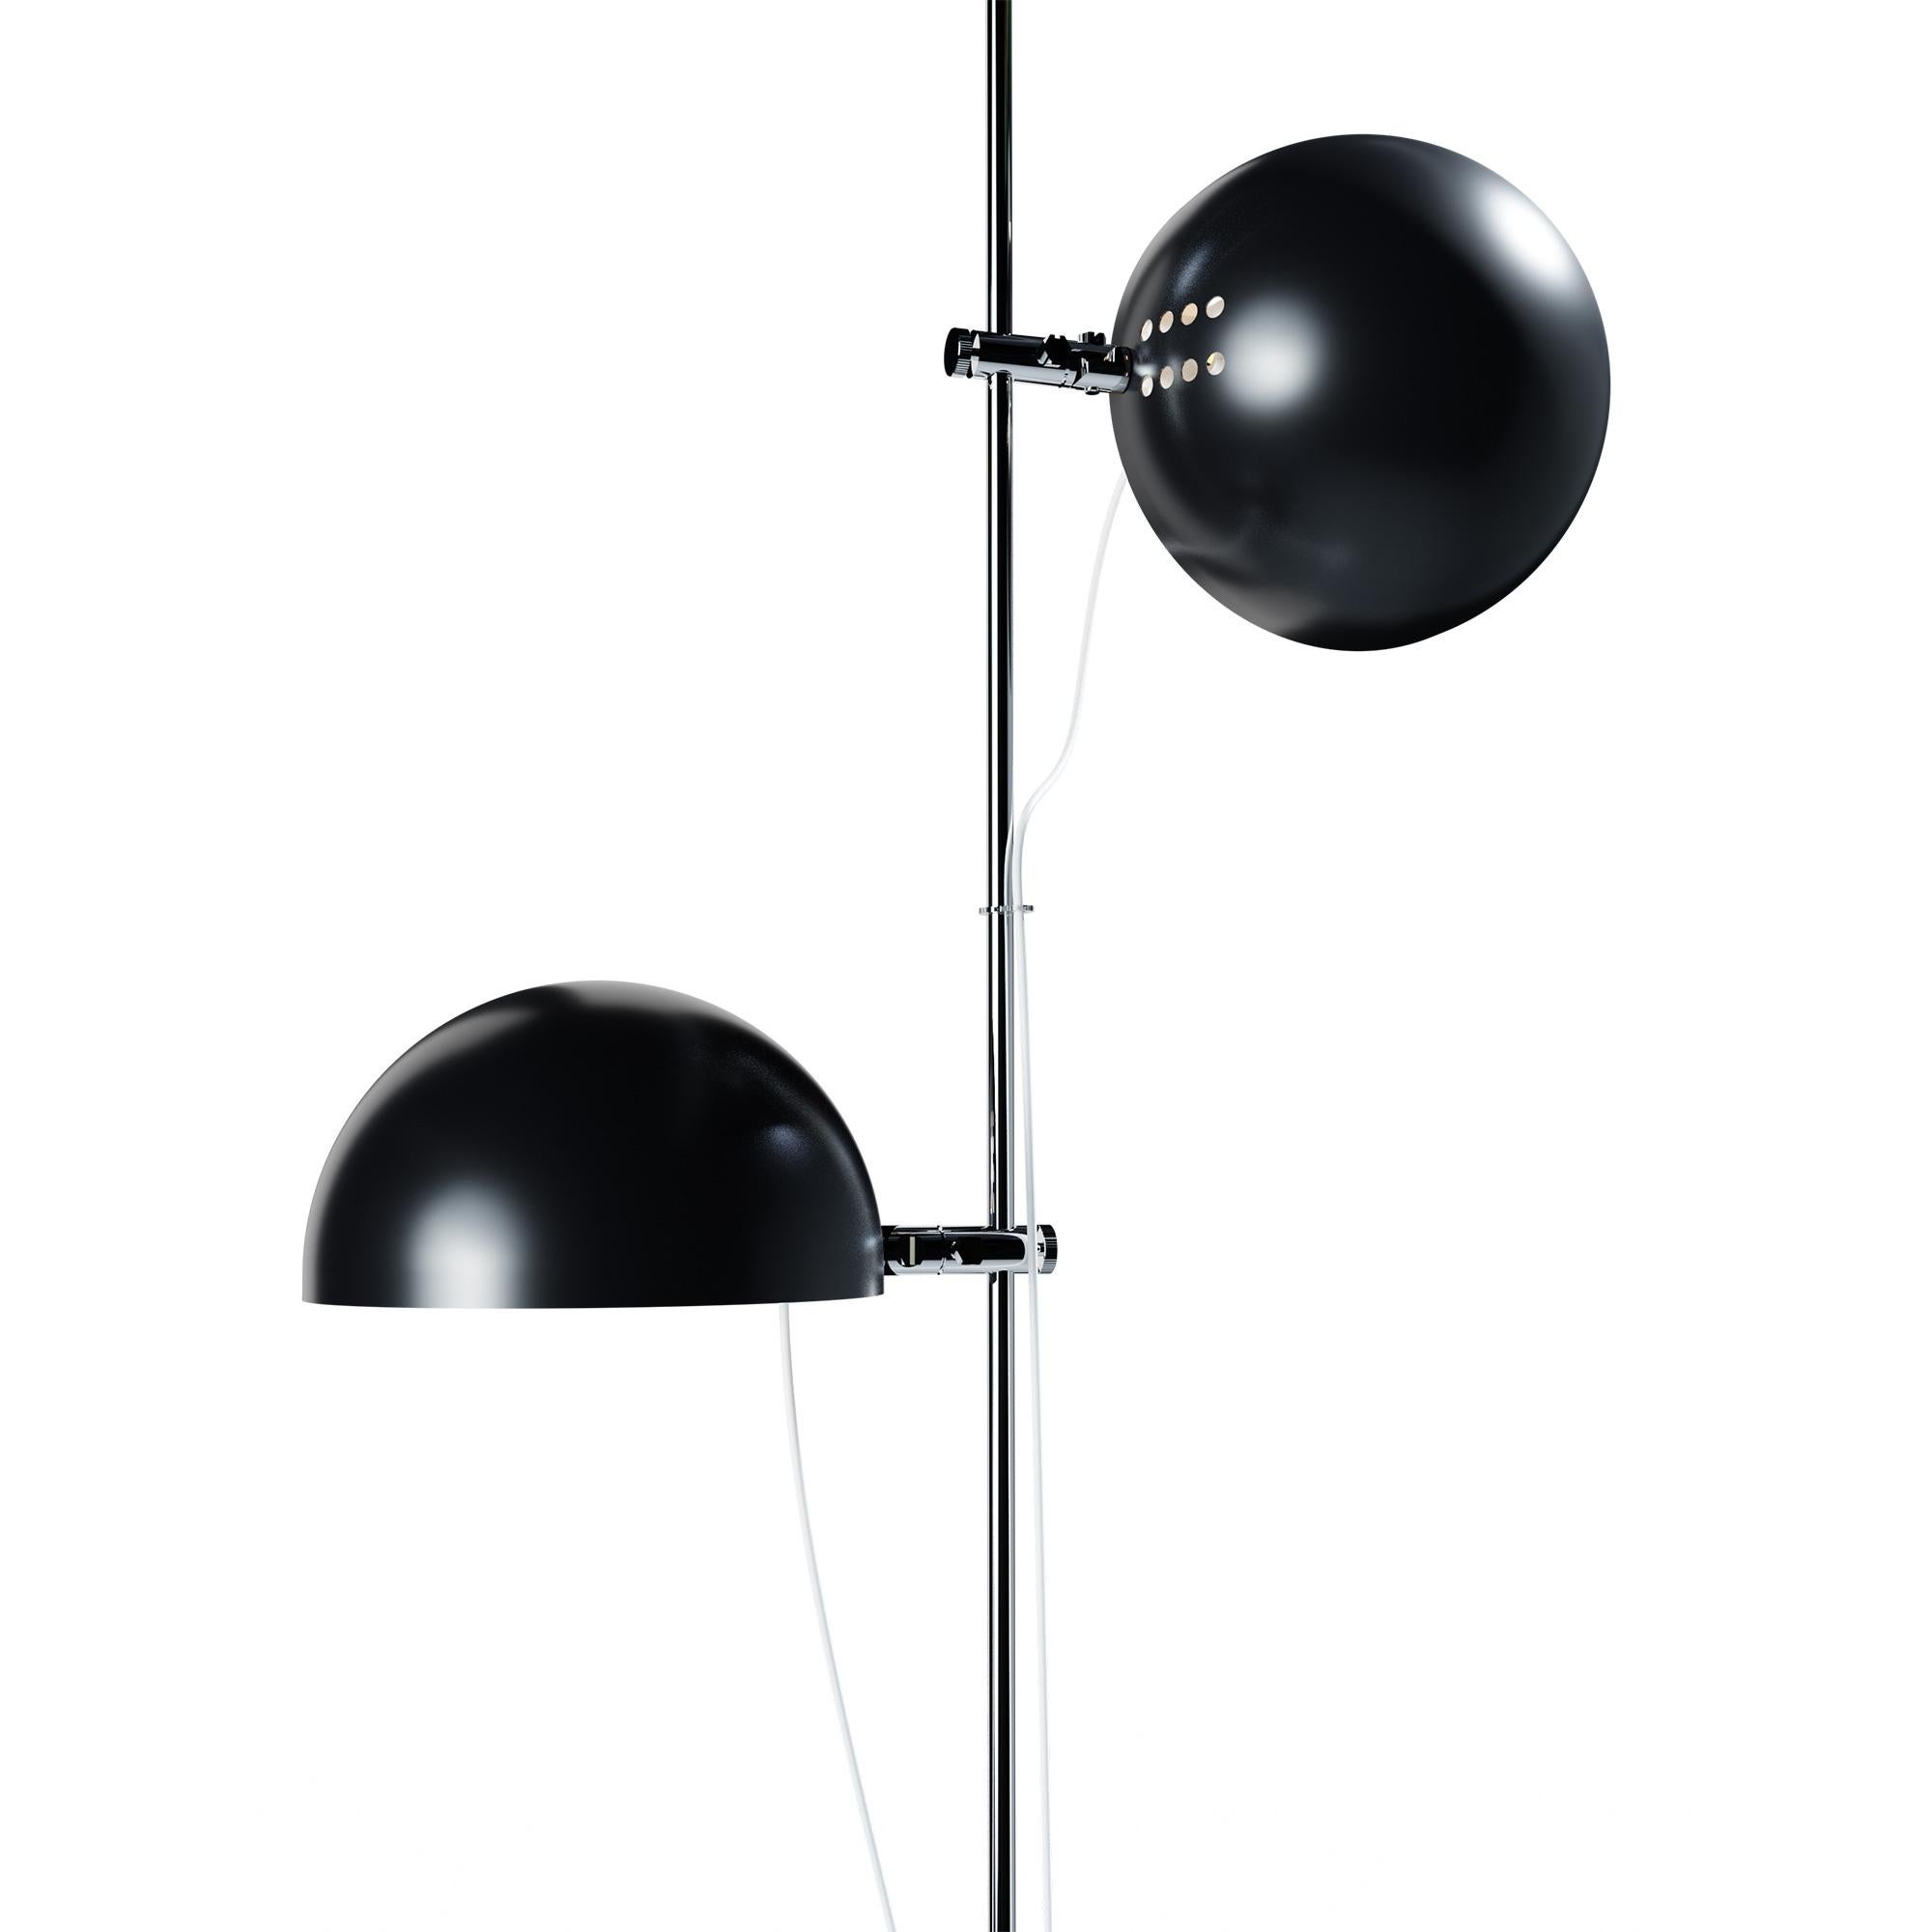 Alain Richard 'A23' metal and marble floor lamp for Disderot in black.

Executed in black painted metal with a marble base, this newly produced numbered edition with included certificate of authenticity is made in France by Disderot with many of